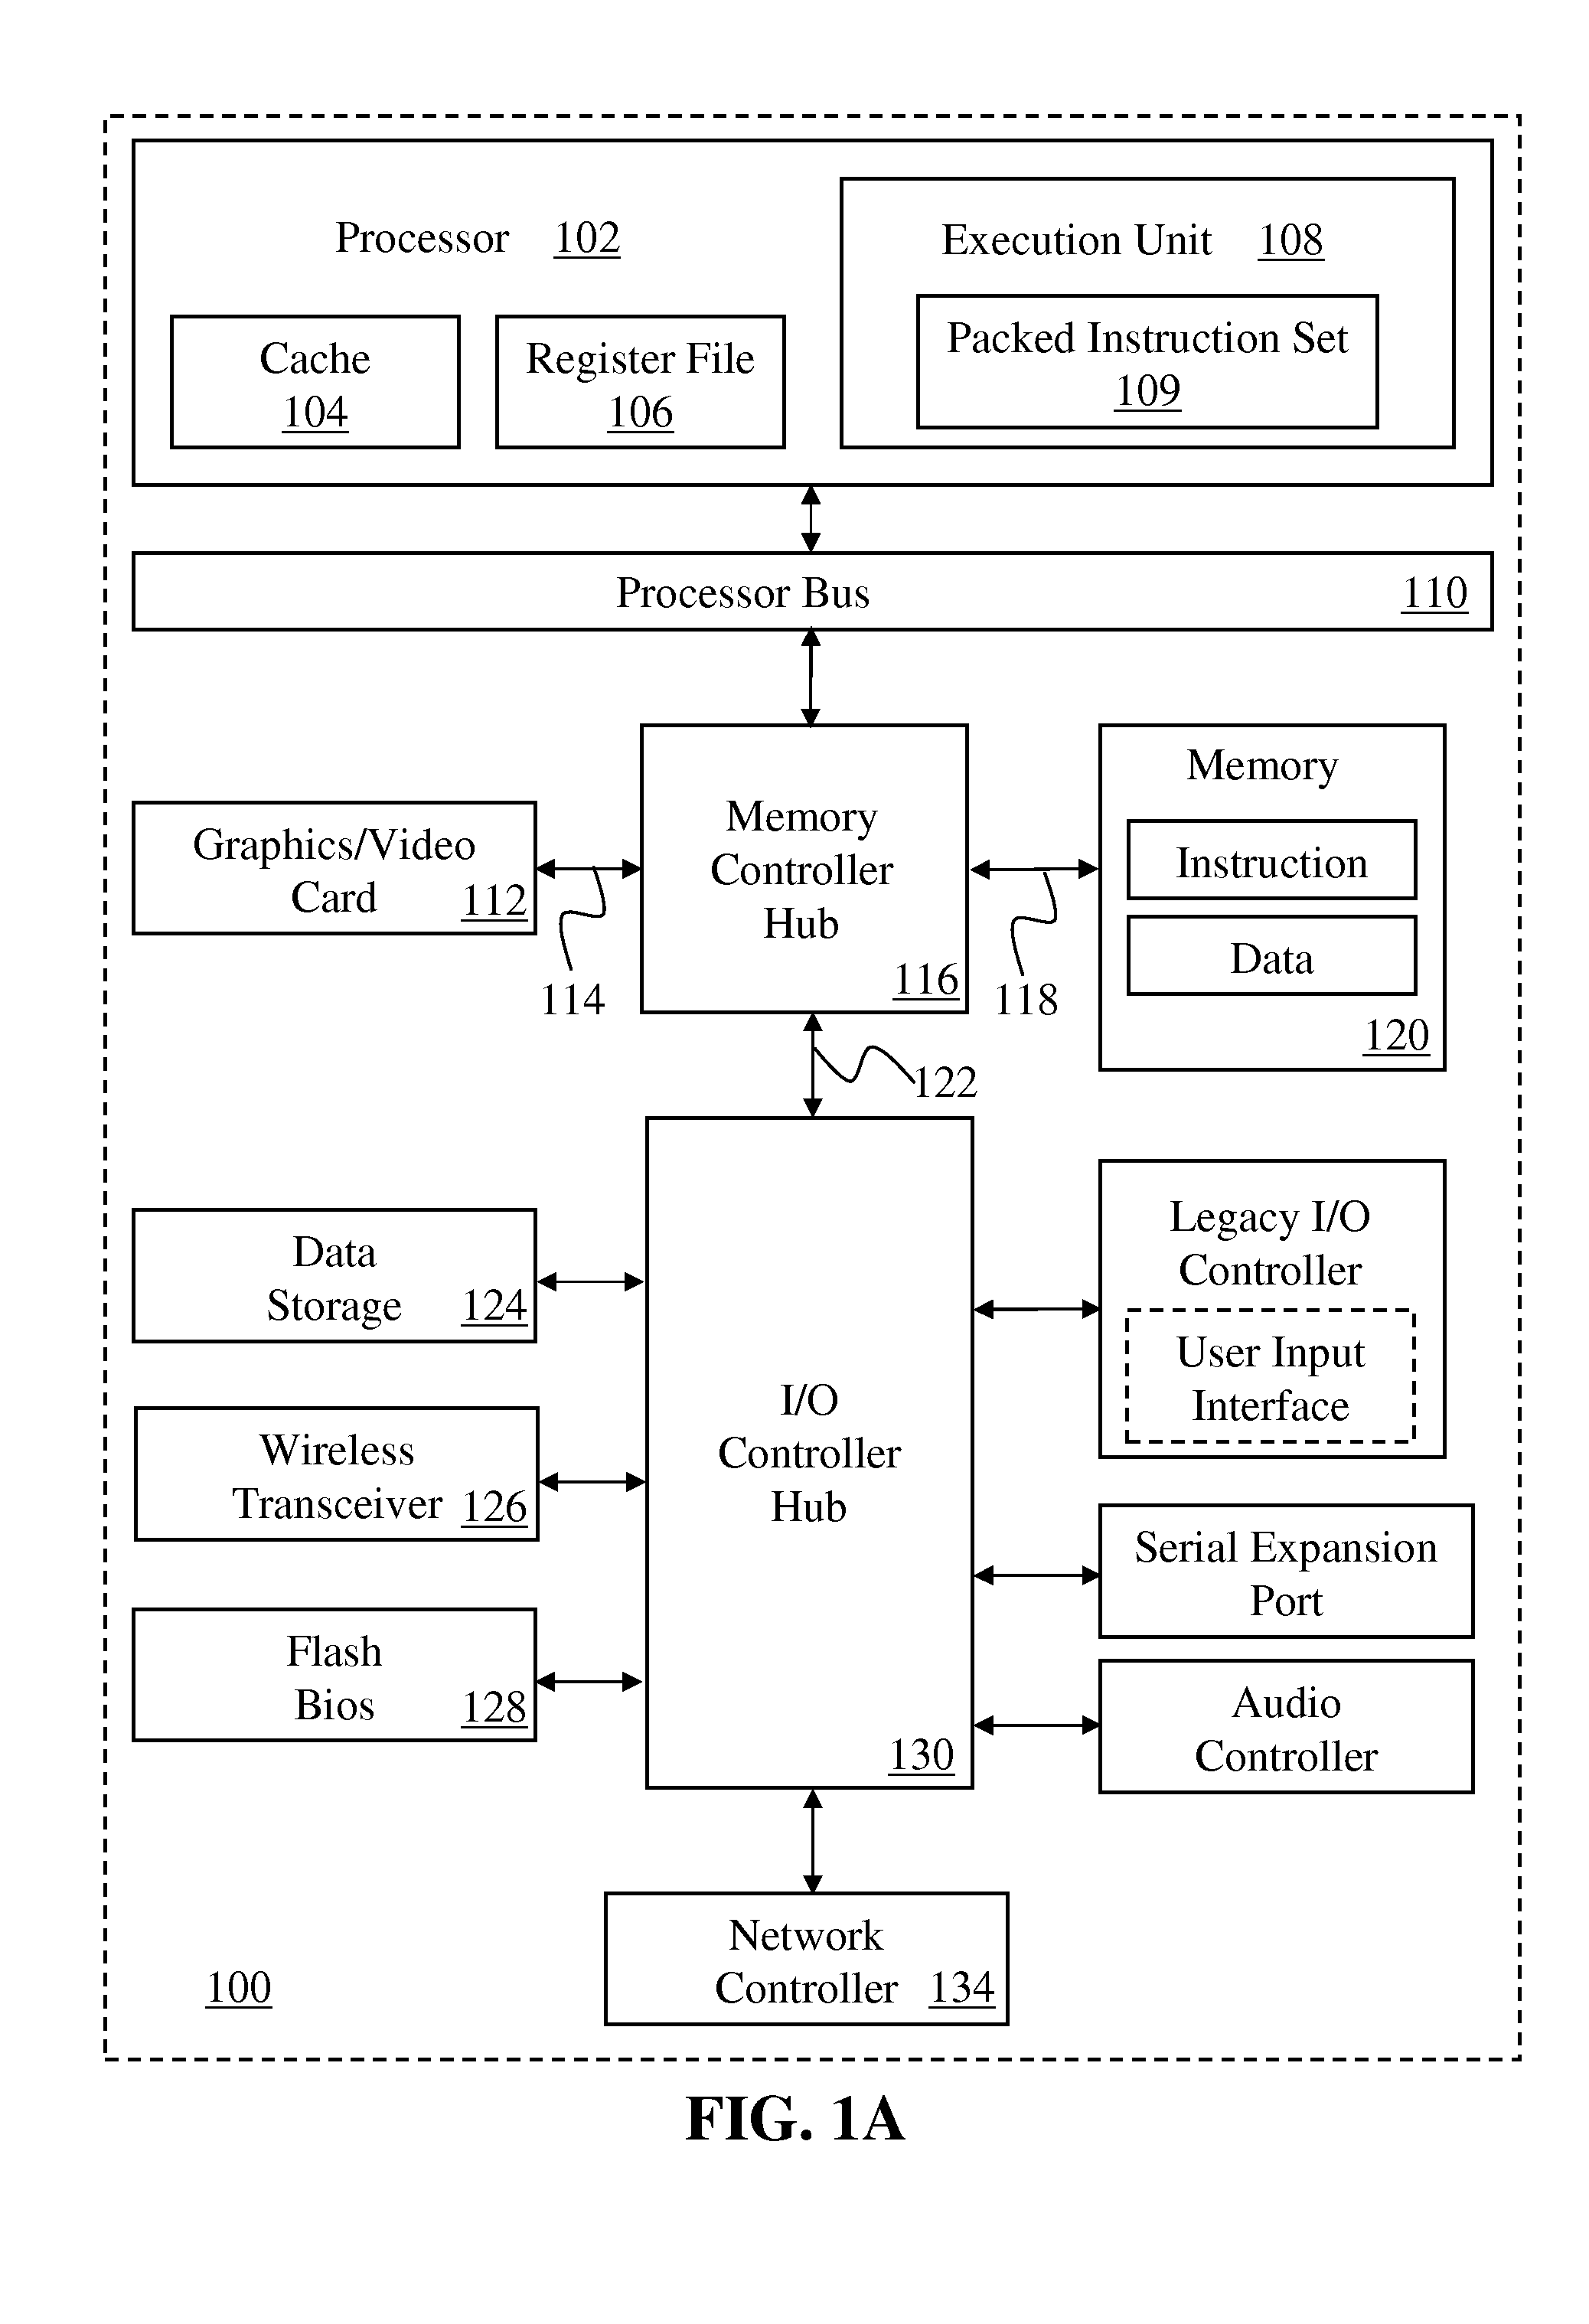 Instruction and logic to provide vector compress and rotate functionality